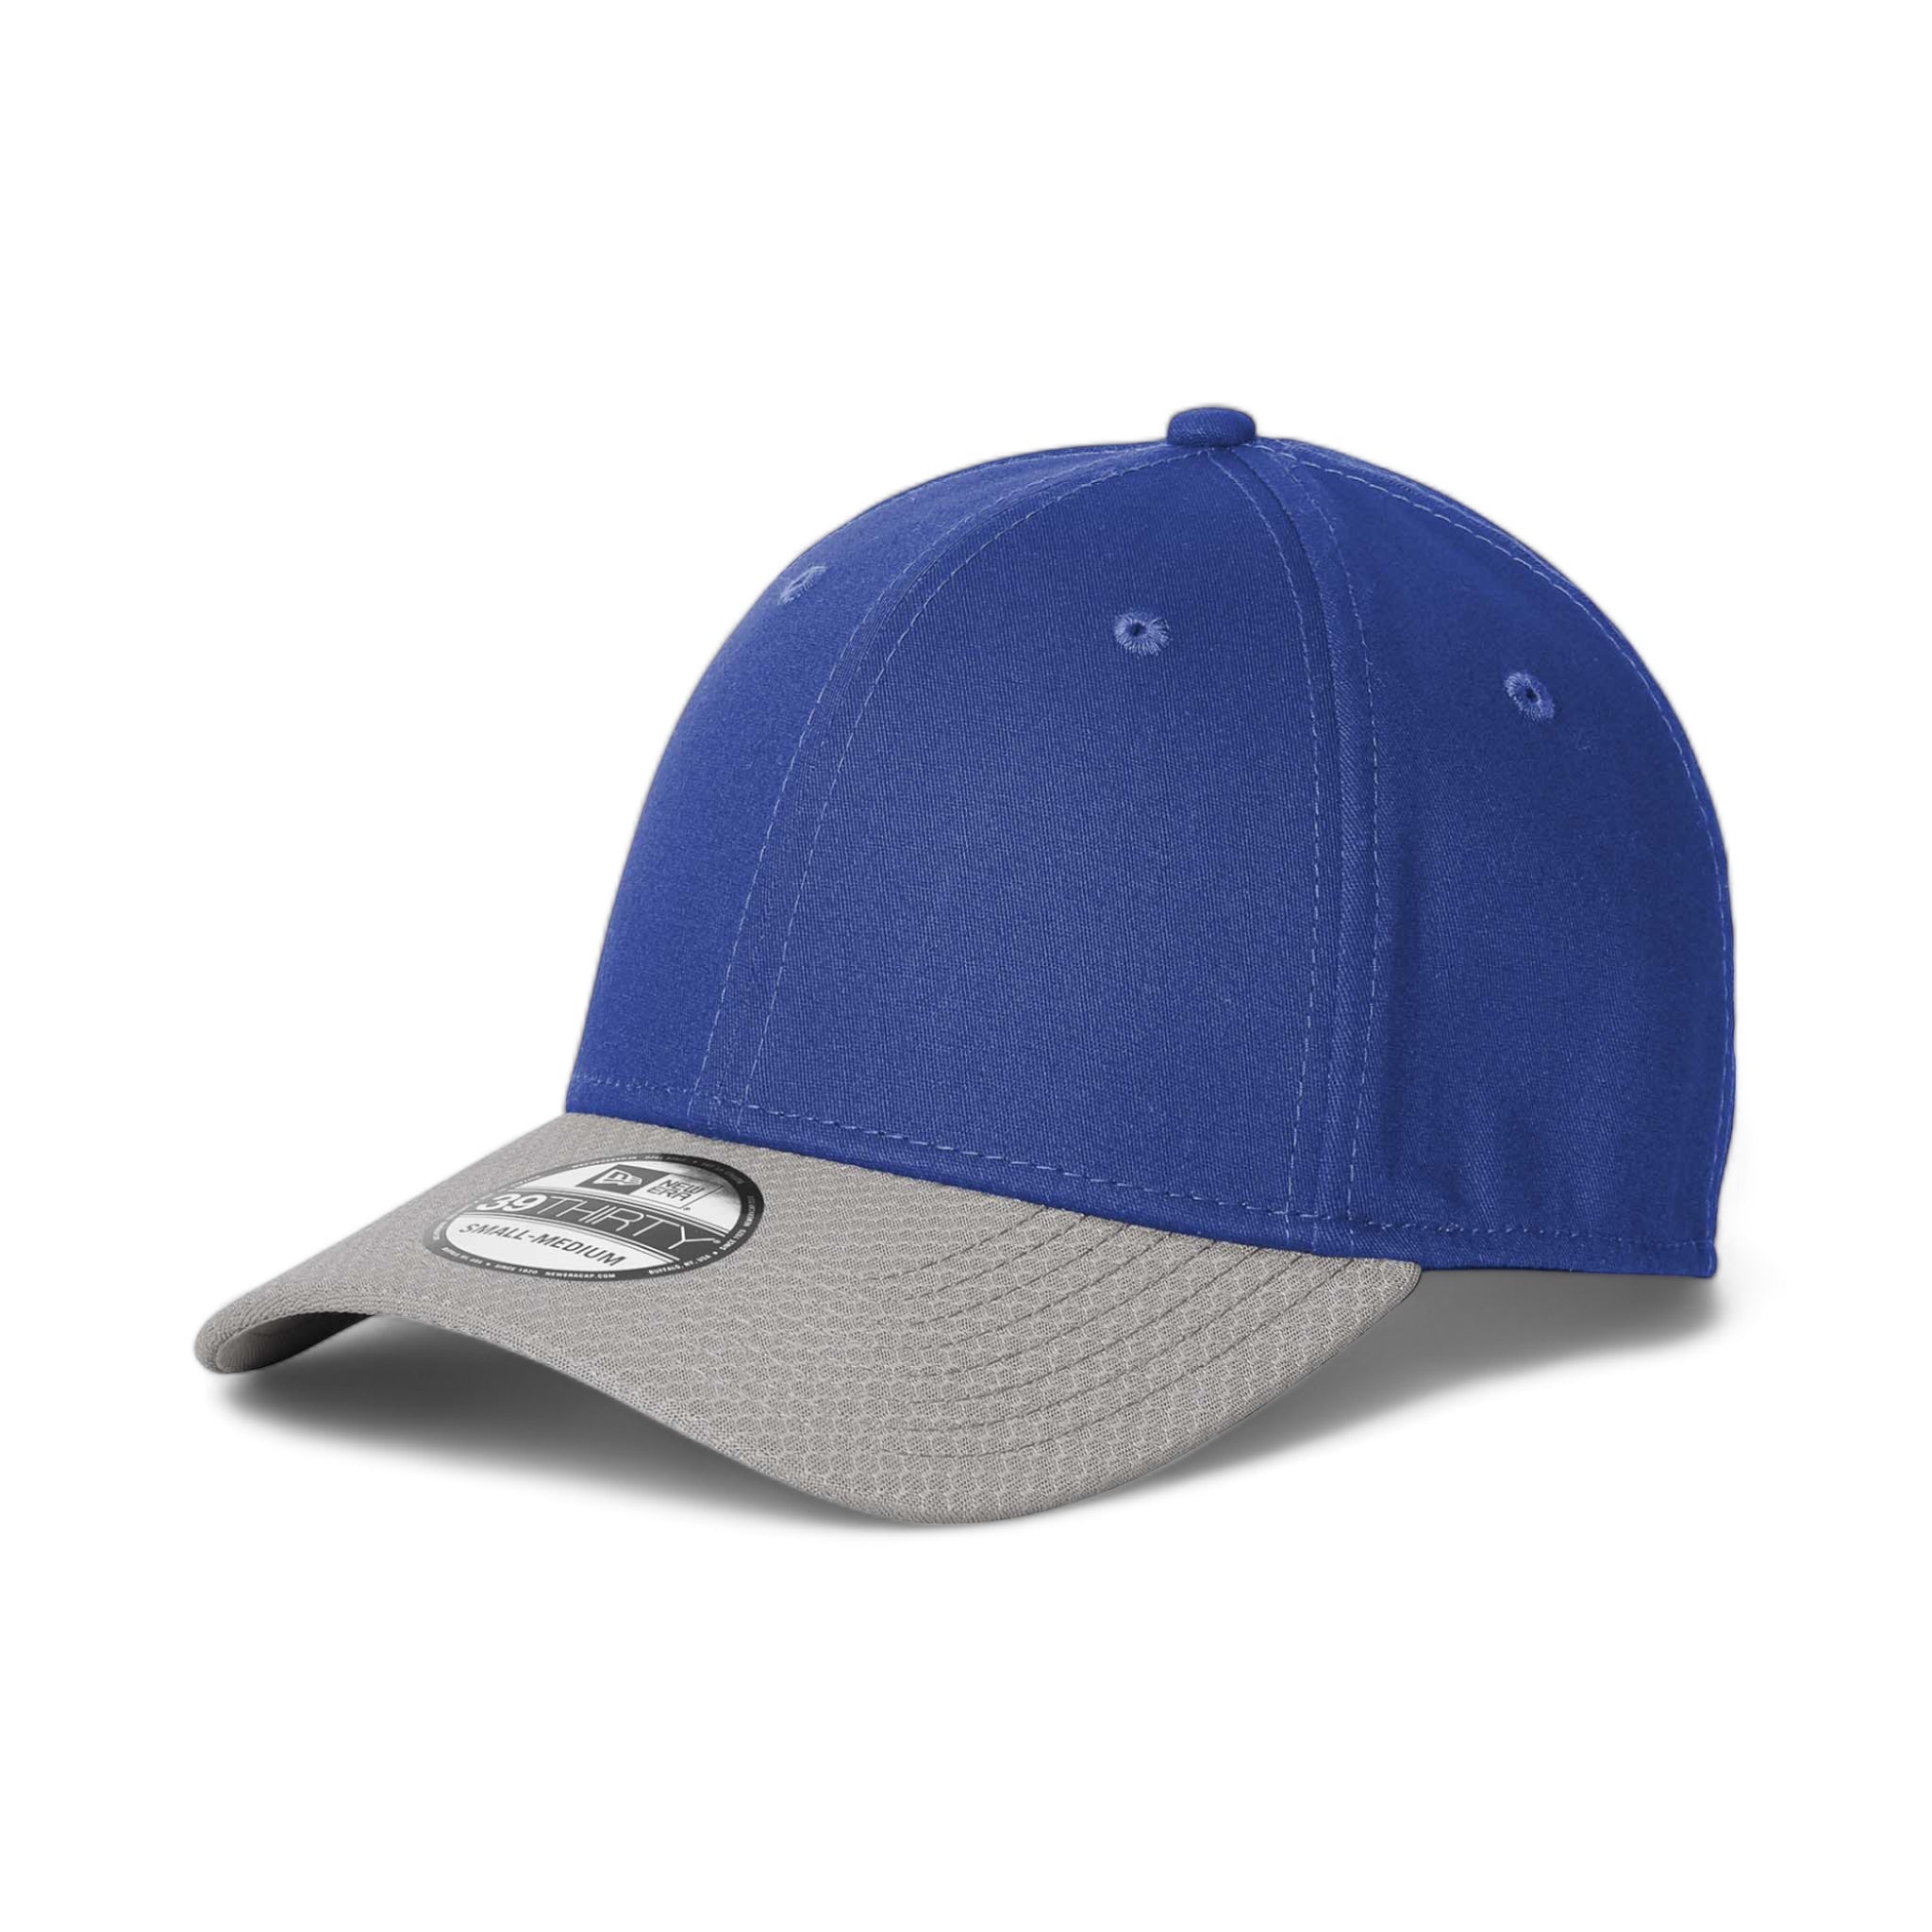 Side view of New Era NE1122 custom hat in royal and grey